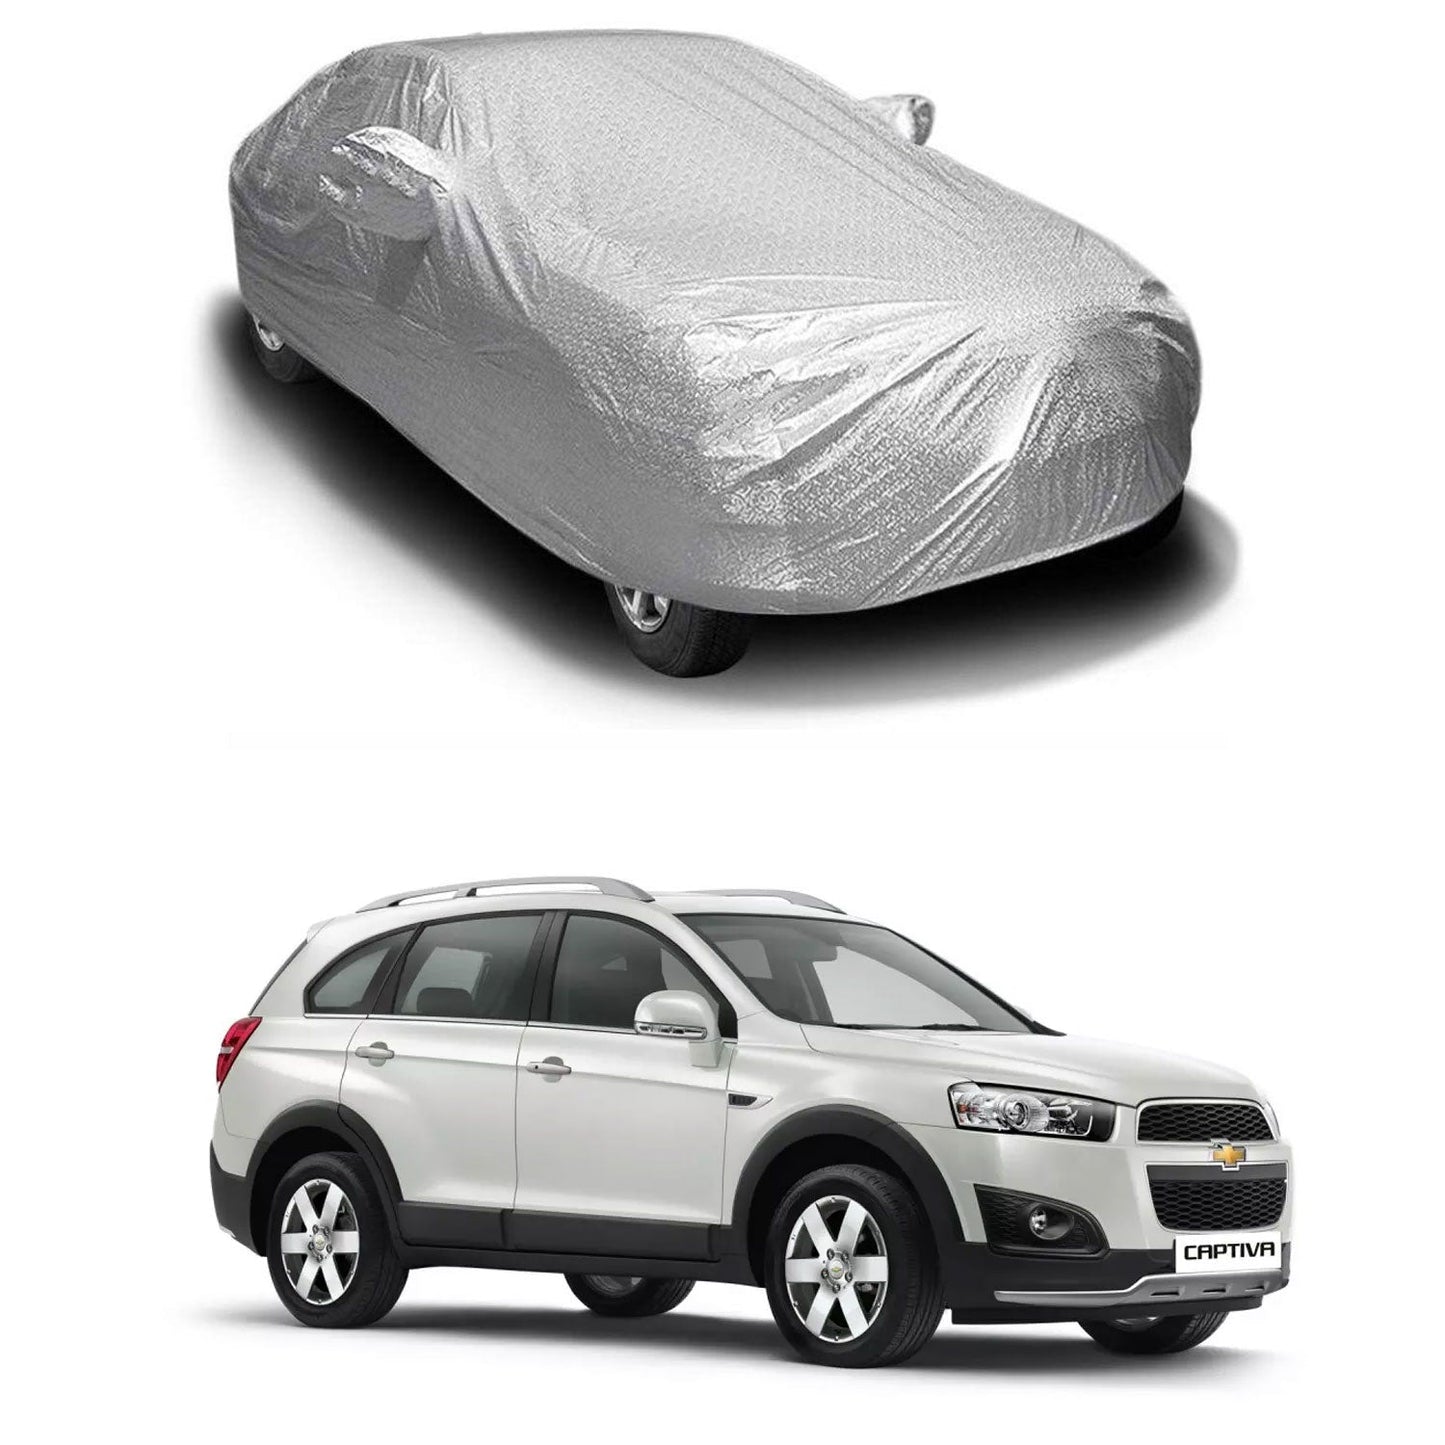 Oshotto Spyro Silver Anti Reflective, dustProof Silver and Water Proof Silver Car Body Cover with Mirror Pockets For Chevrolet Captiva